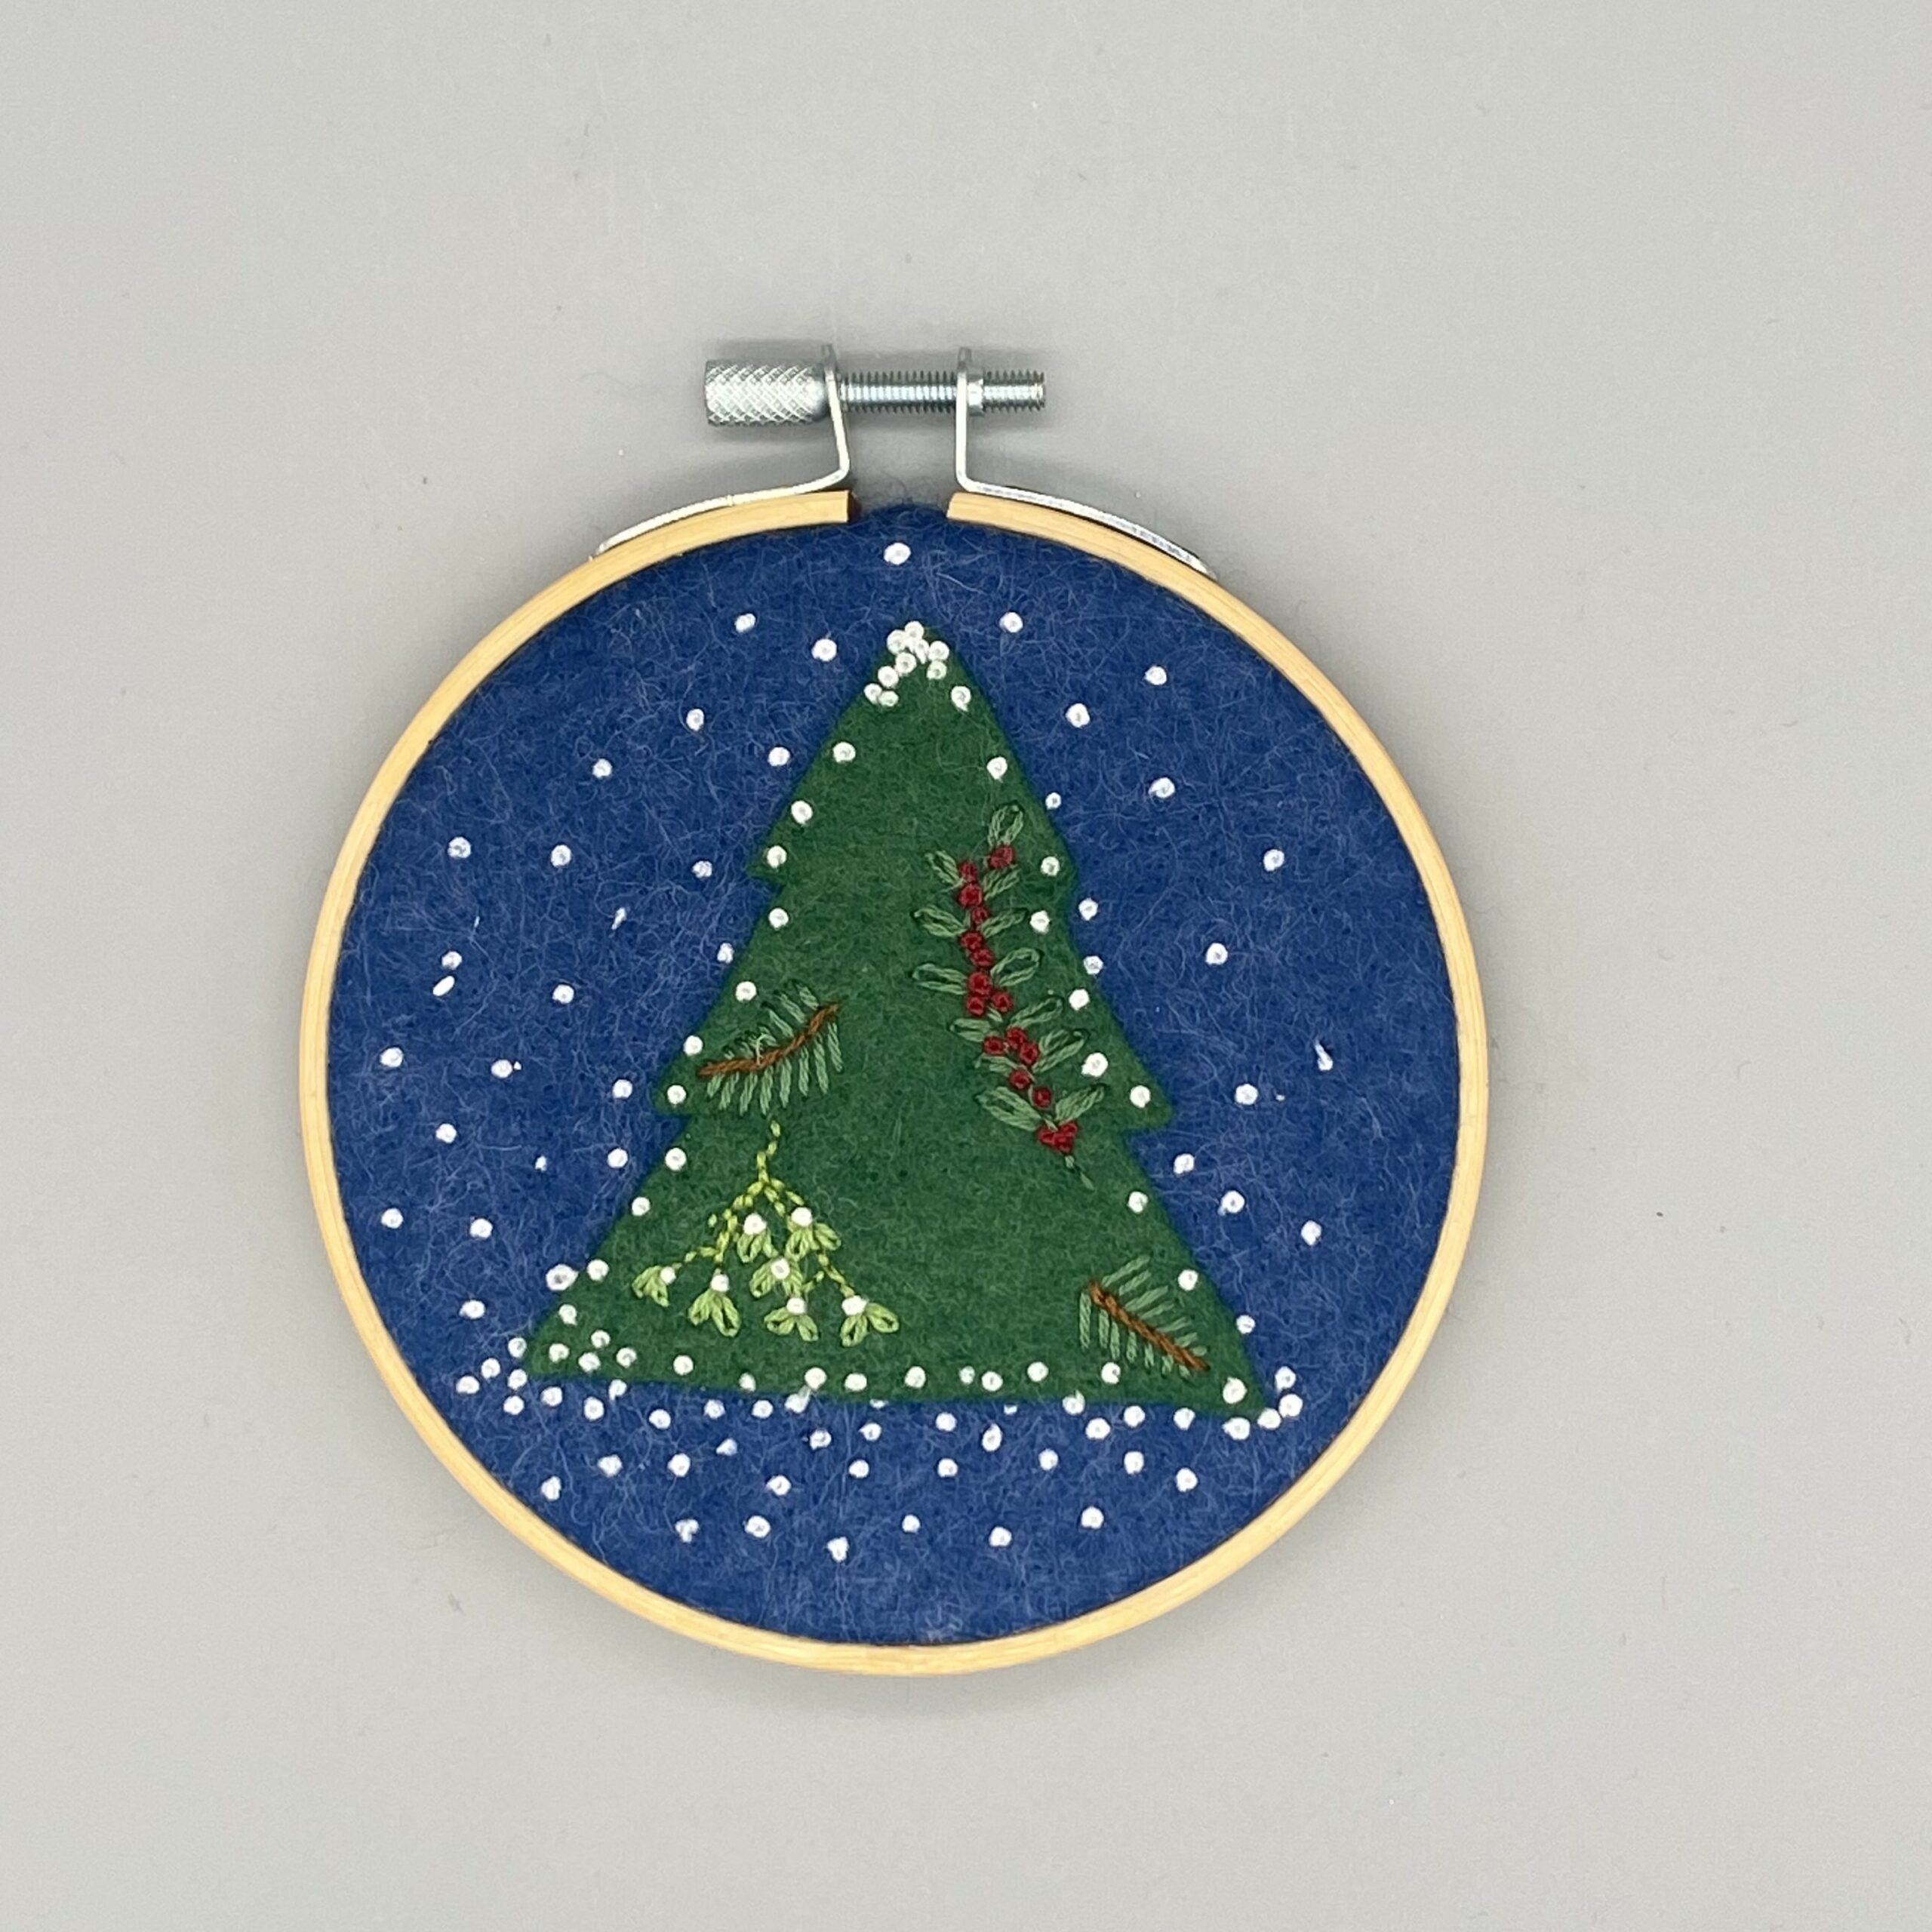 Featured image for “Snowy Tree Festive Hoop”